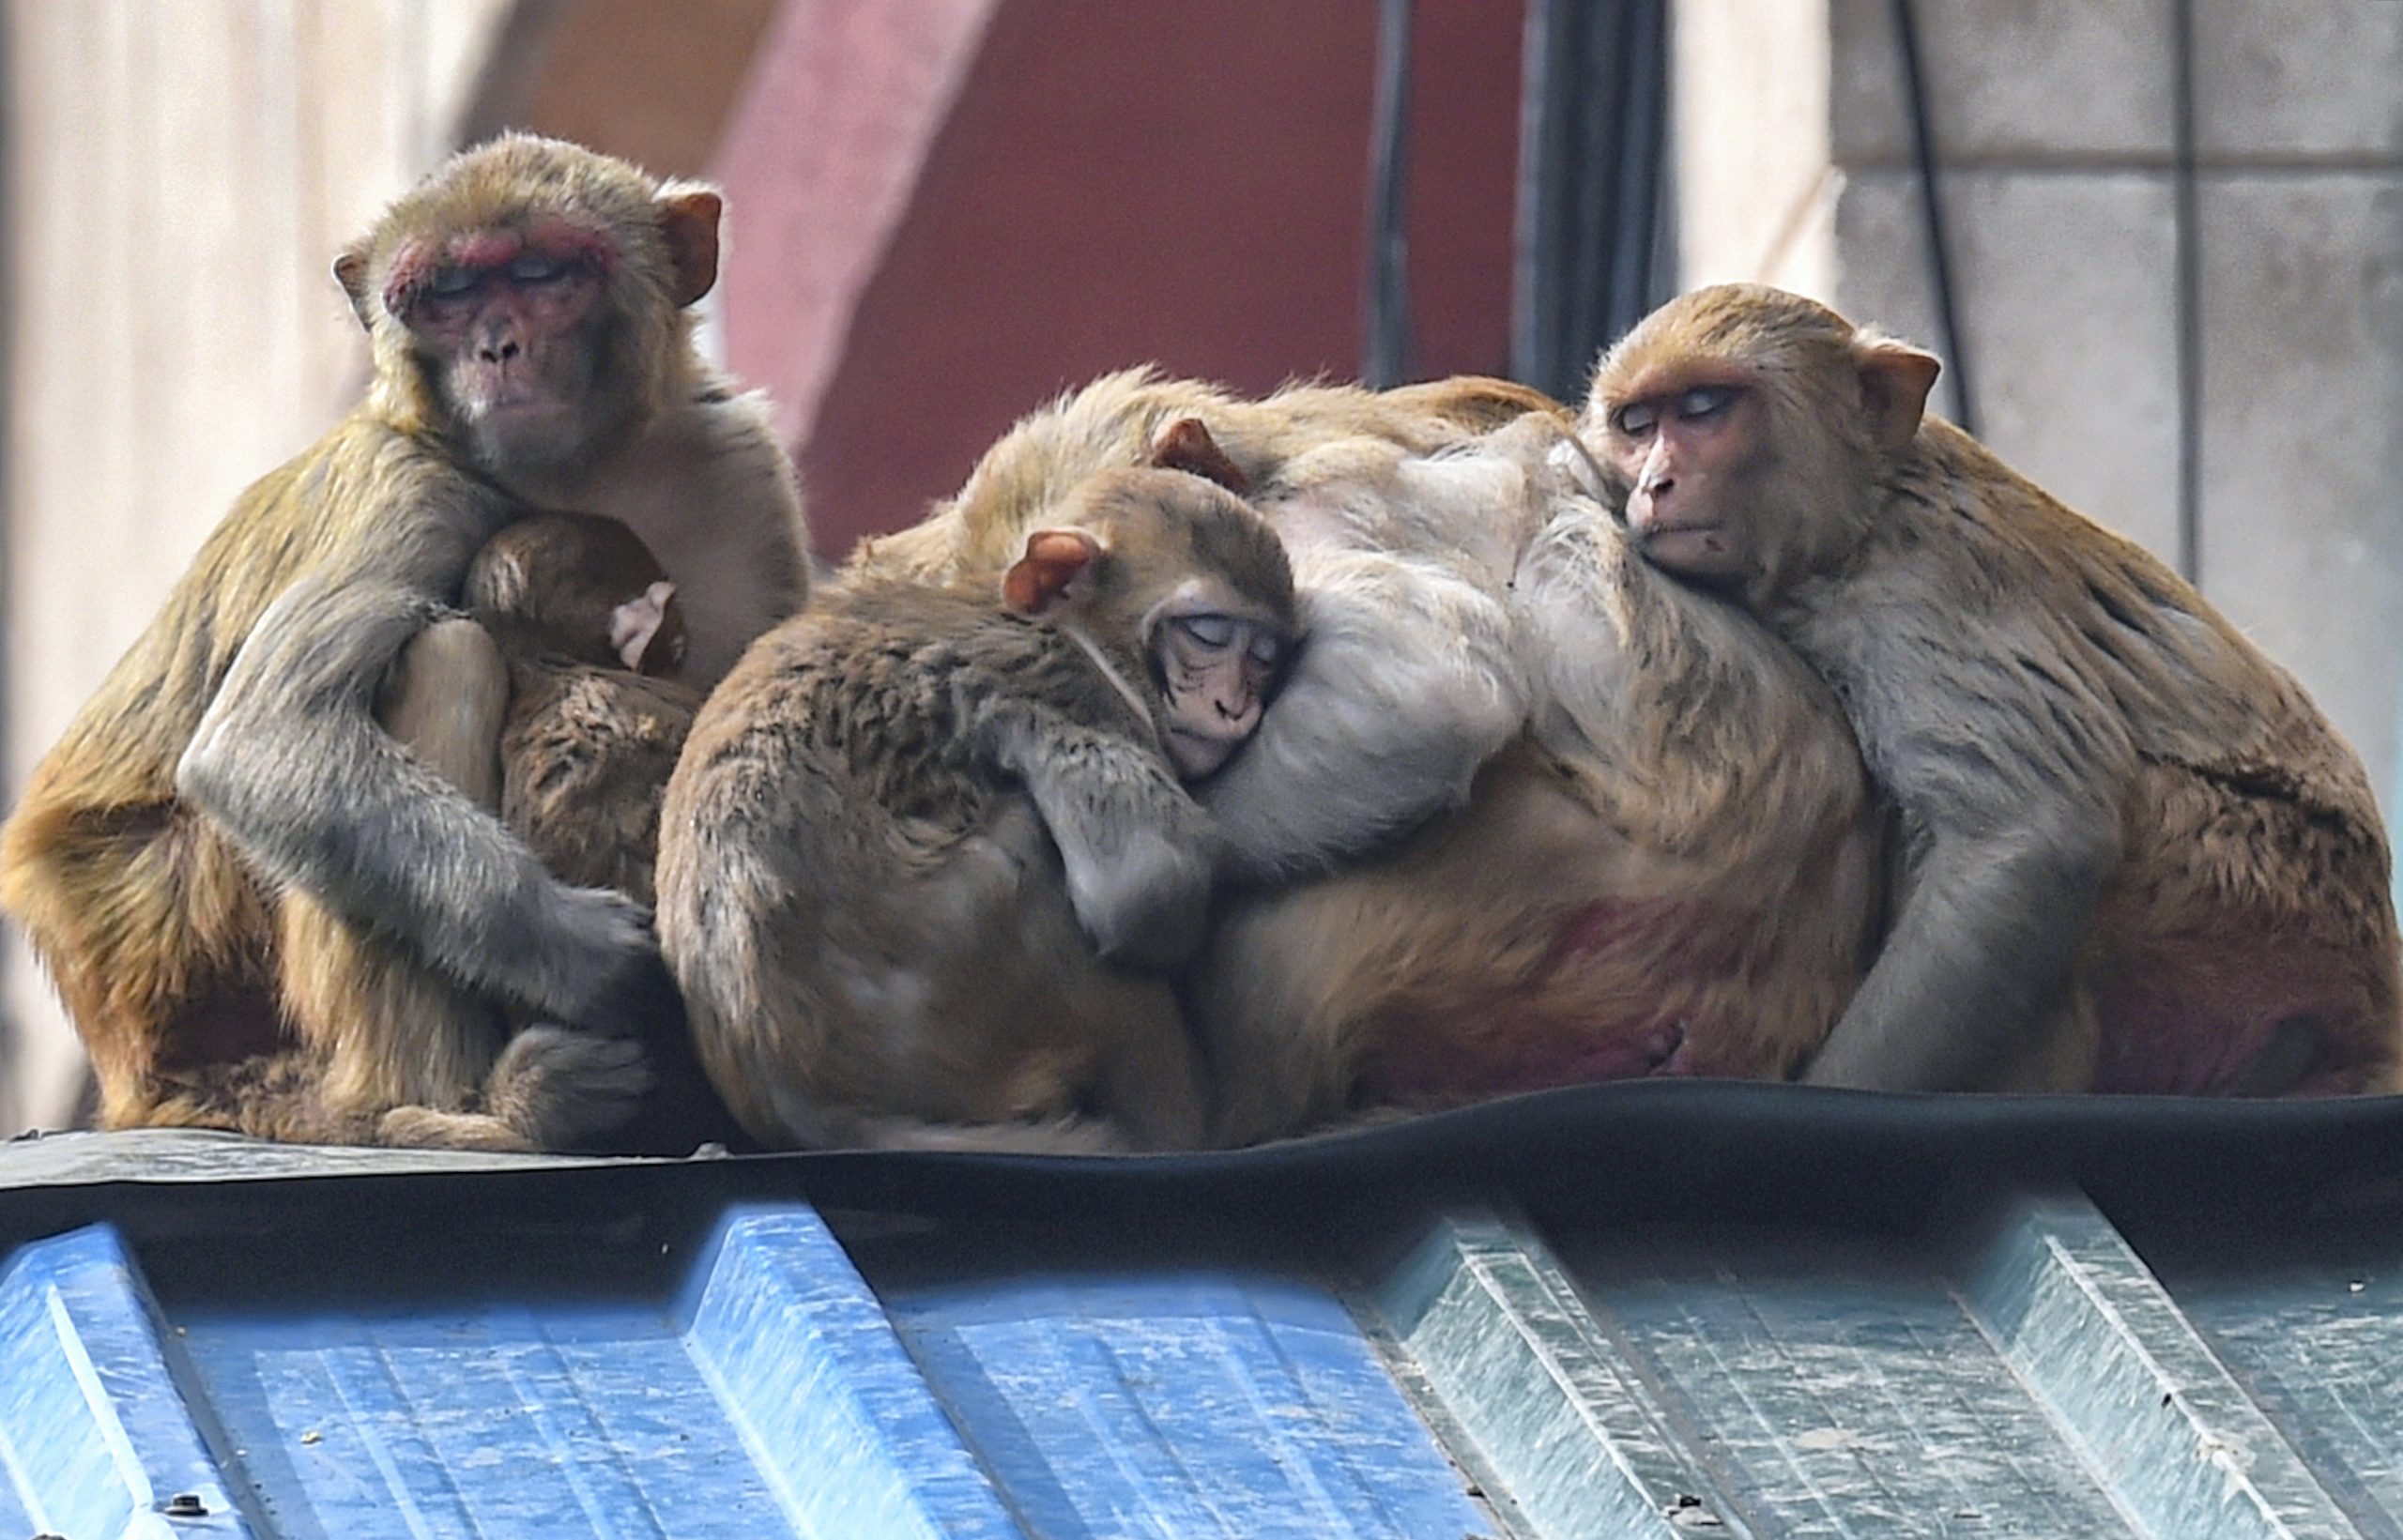 Watch: Mama monkey embraces baby after they are reunited